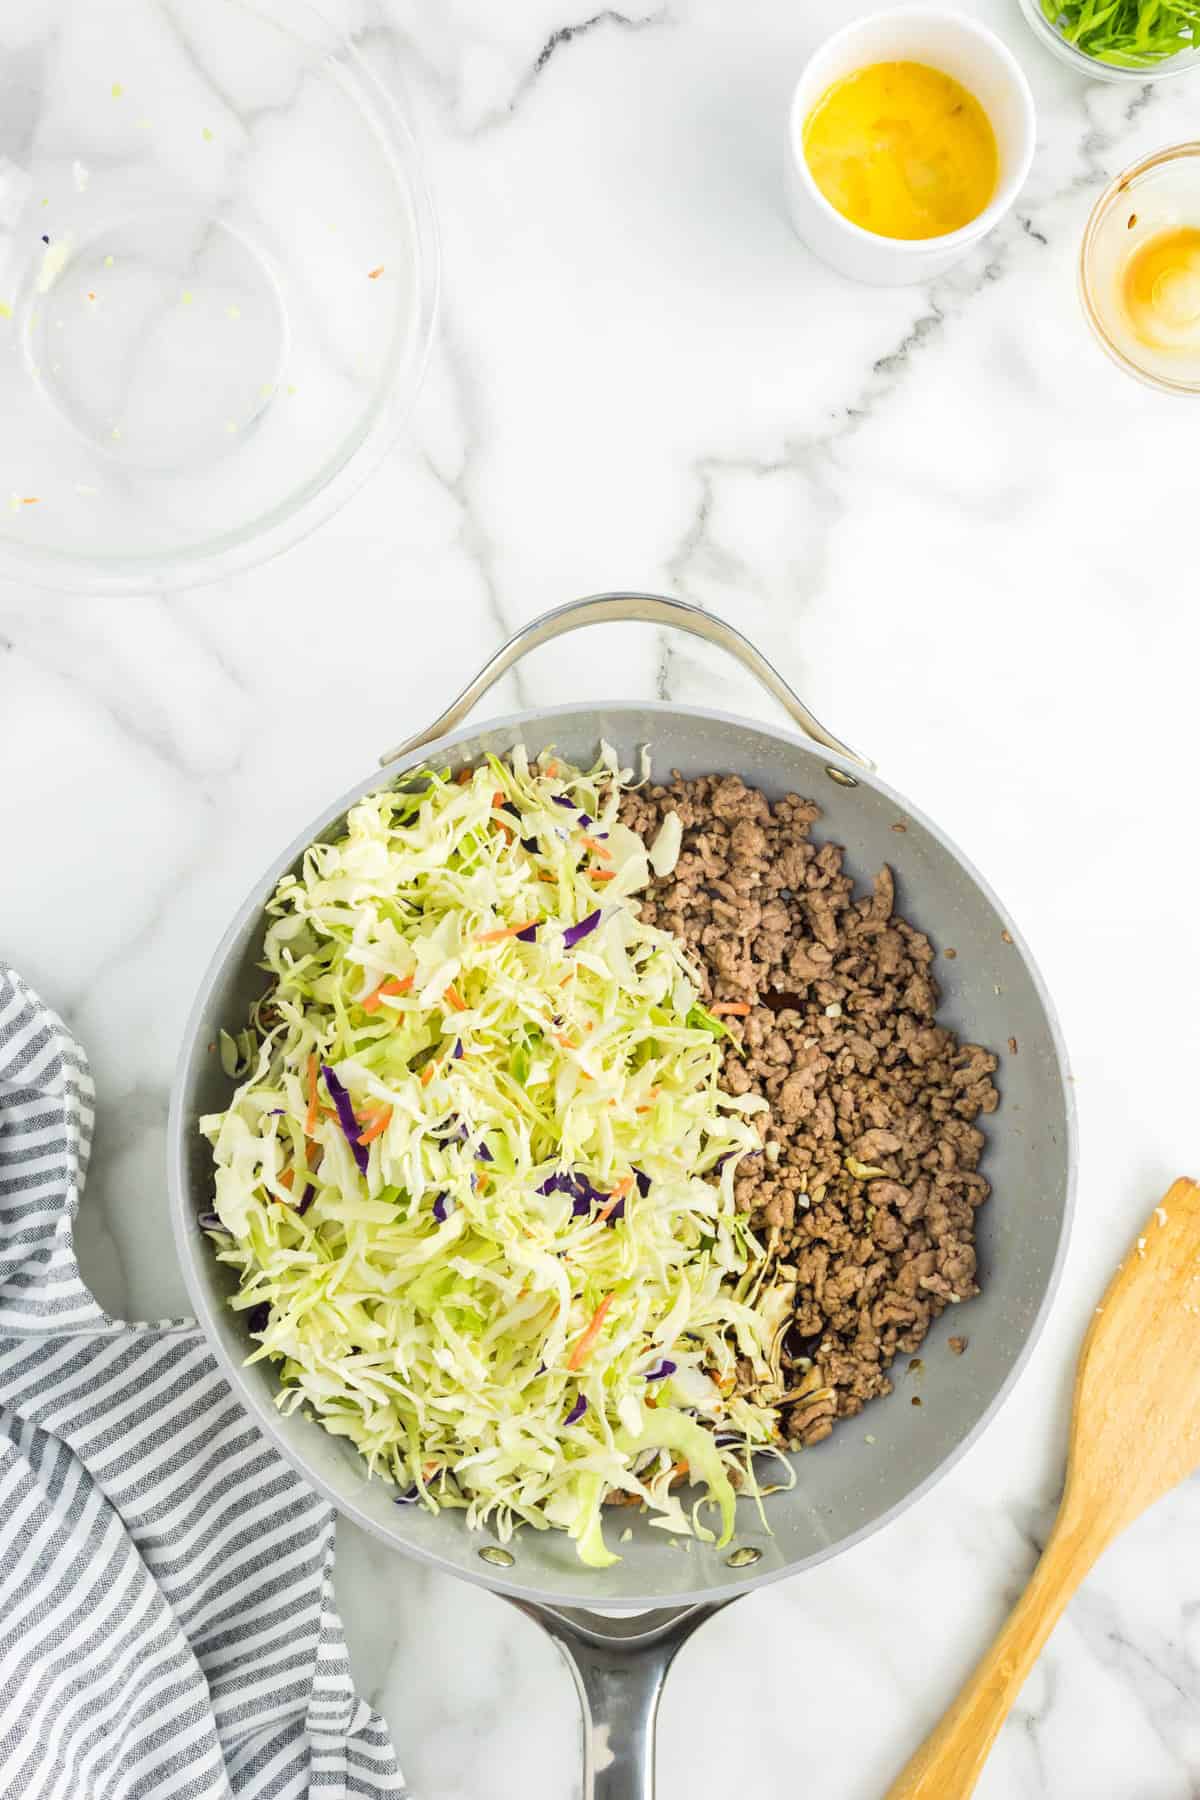 Adding coleslaw mix to ground meat for Egg Roll in a Bowl Recipe